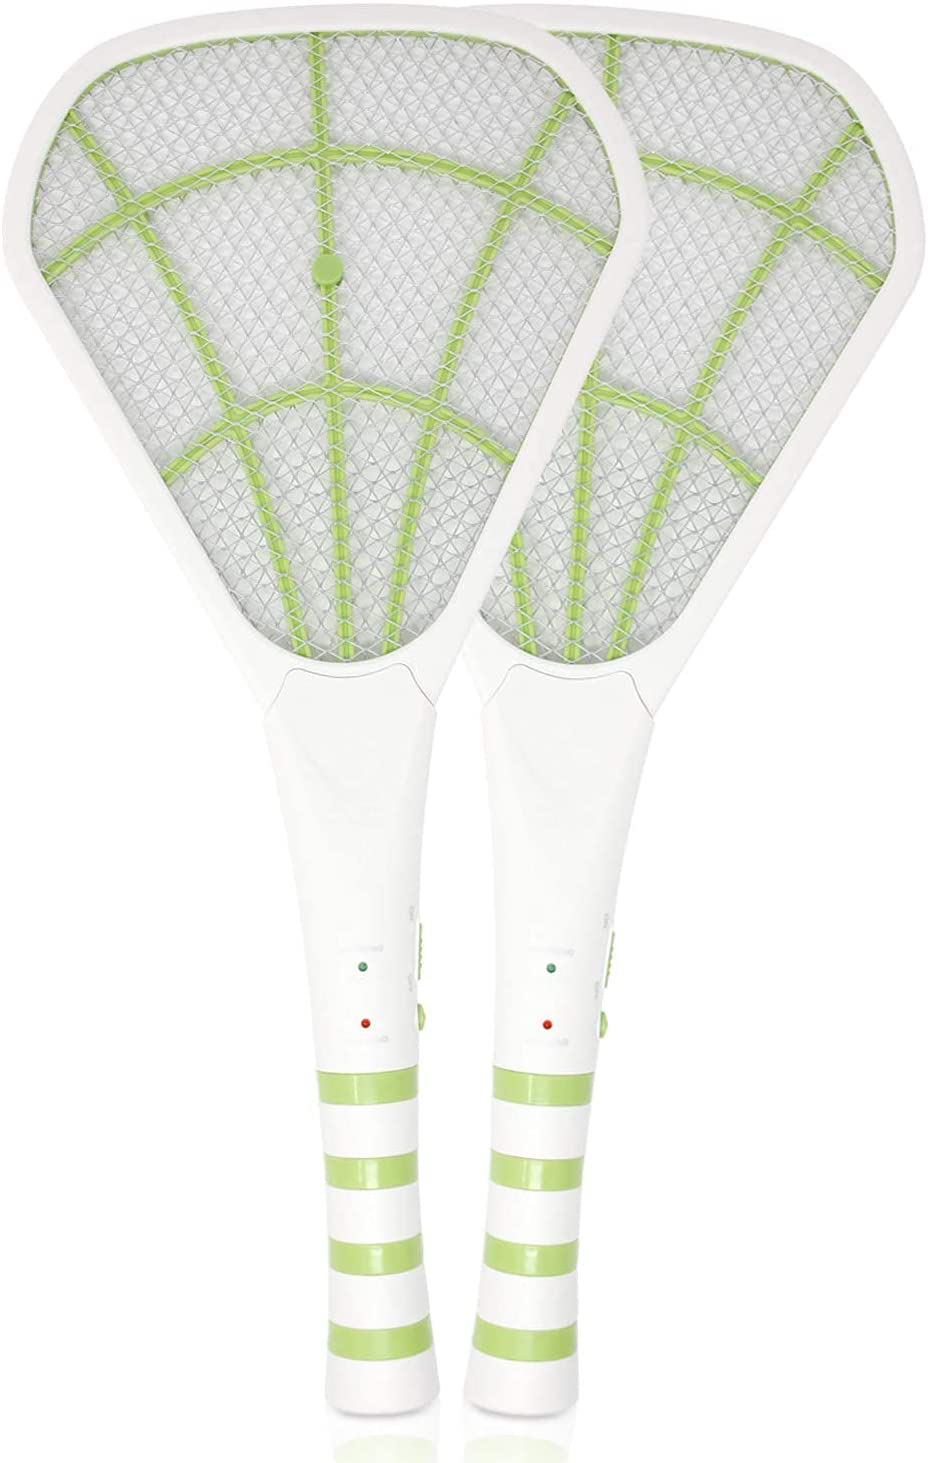 BugKwikZap 2PK of USB Rechargeable Electric Bug Zapper 3600V, Mosquito Killer Racket, Rechargeable Battery Powered Fly Swatter (White-Green)